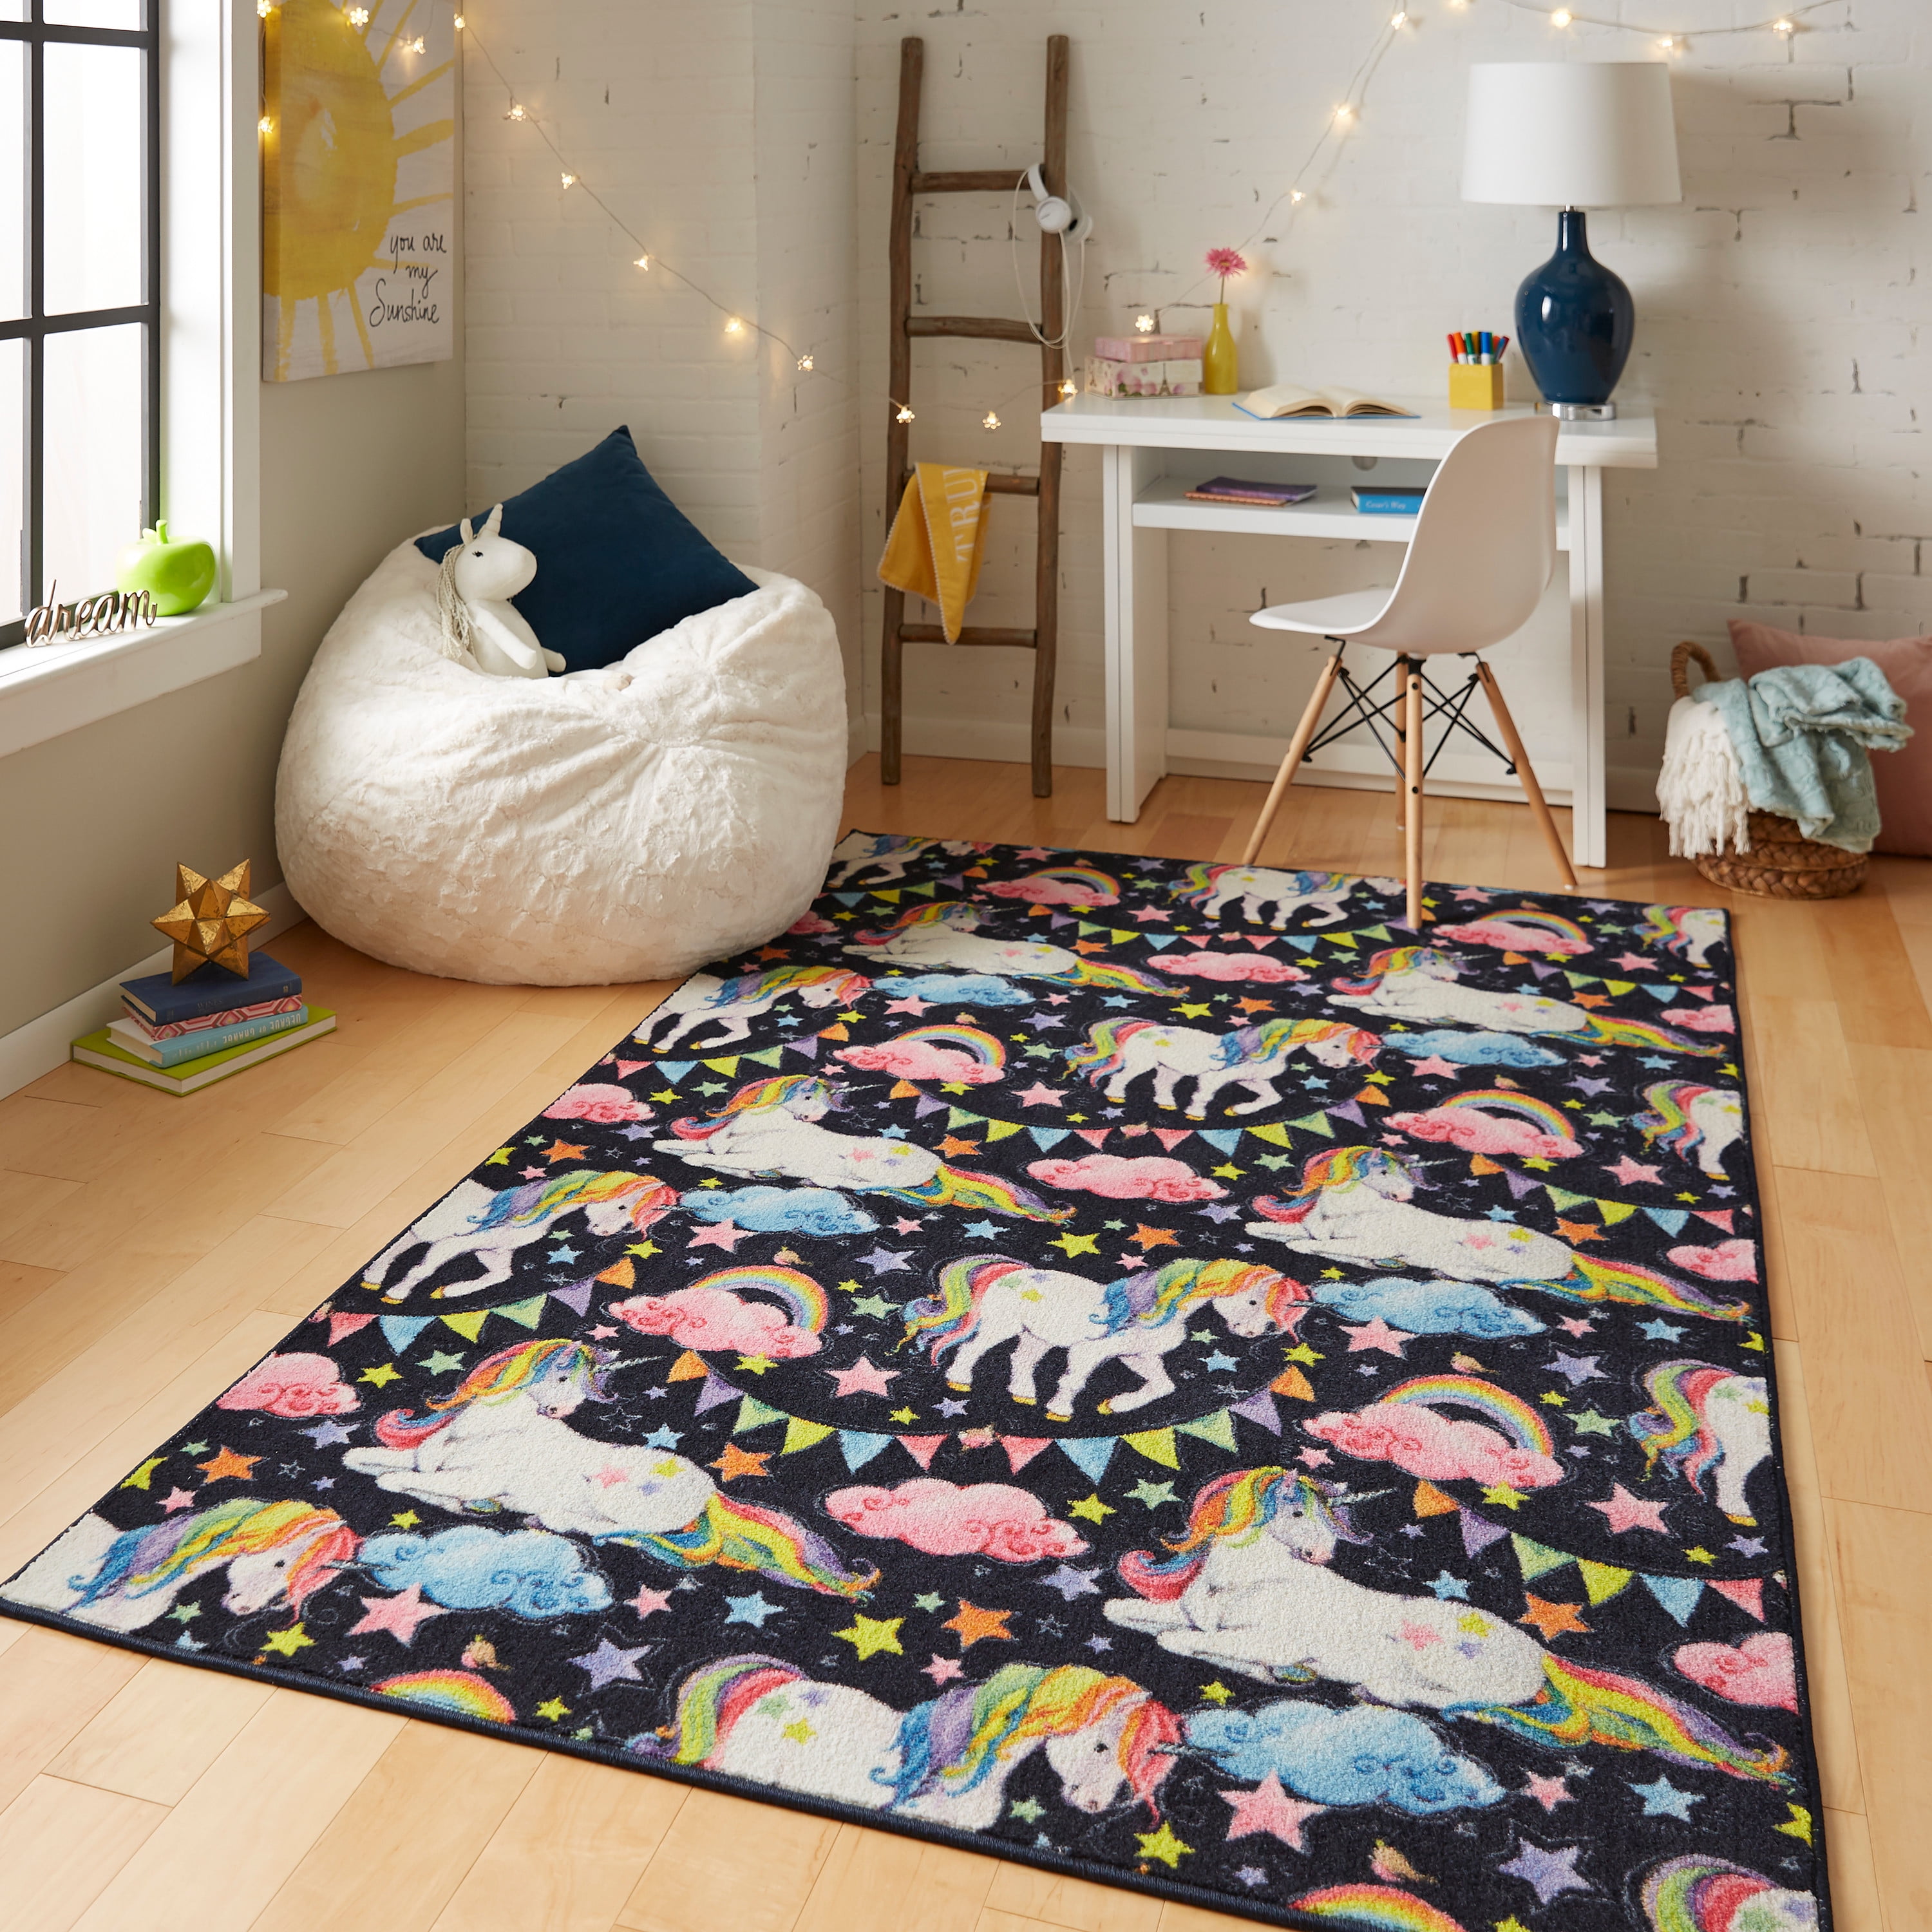 Top Carpenter Unicorn Background with Rainbow Area Rug Carpet for Living Room Bedroom 3'x2' Light Weight Polyester Fabric